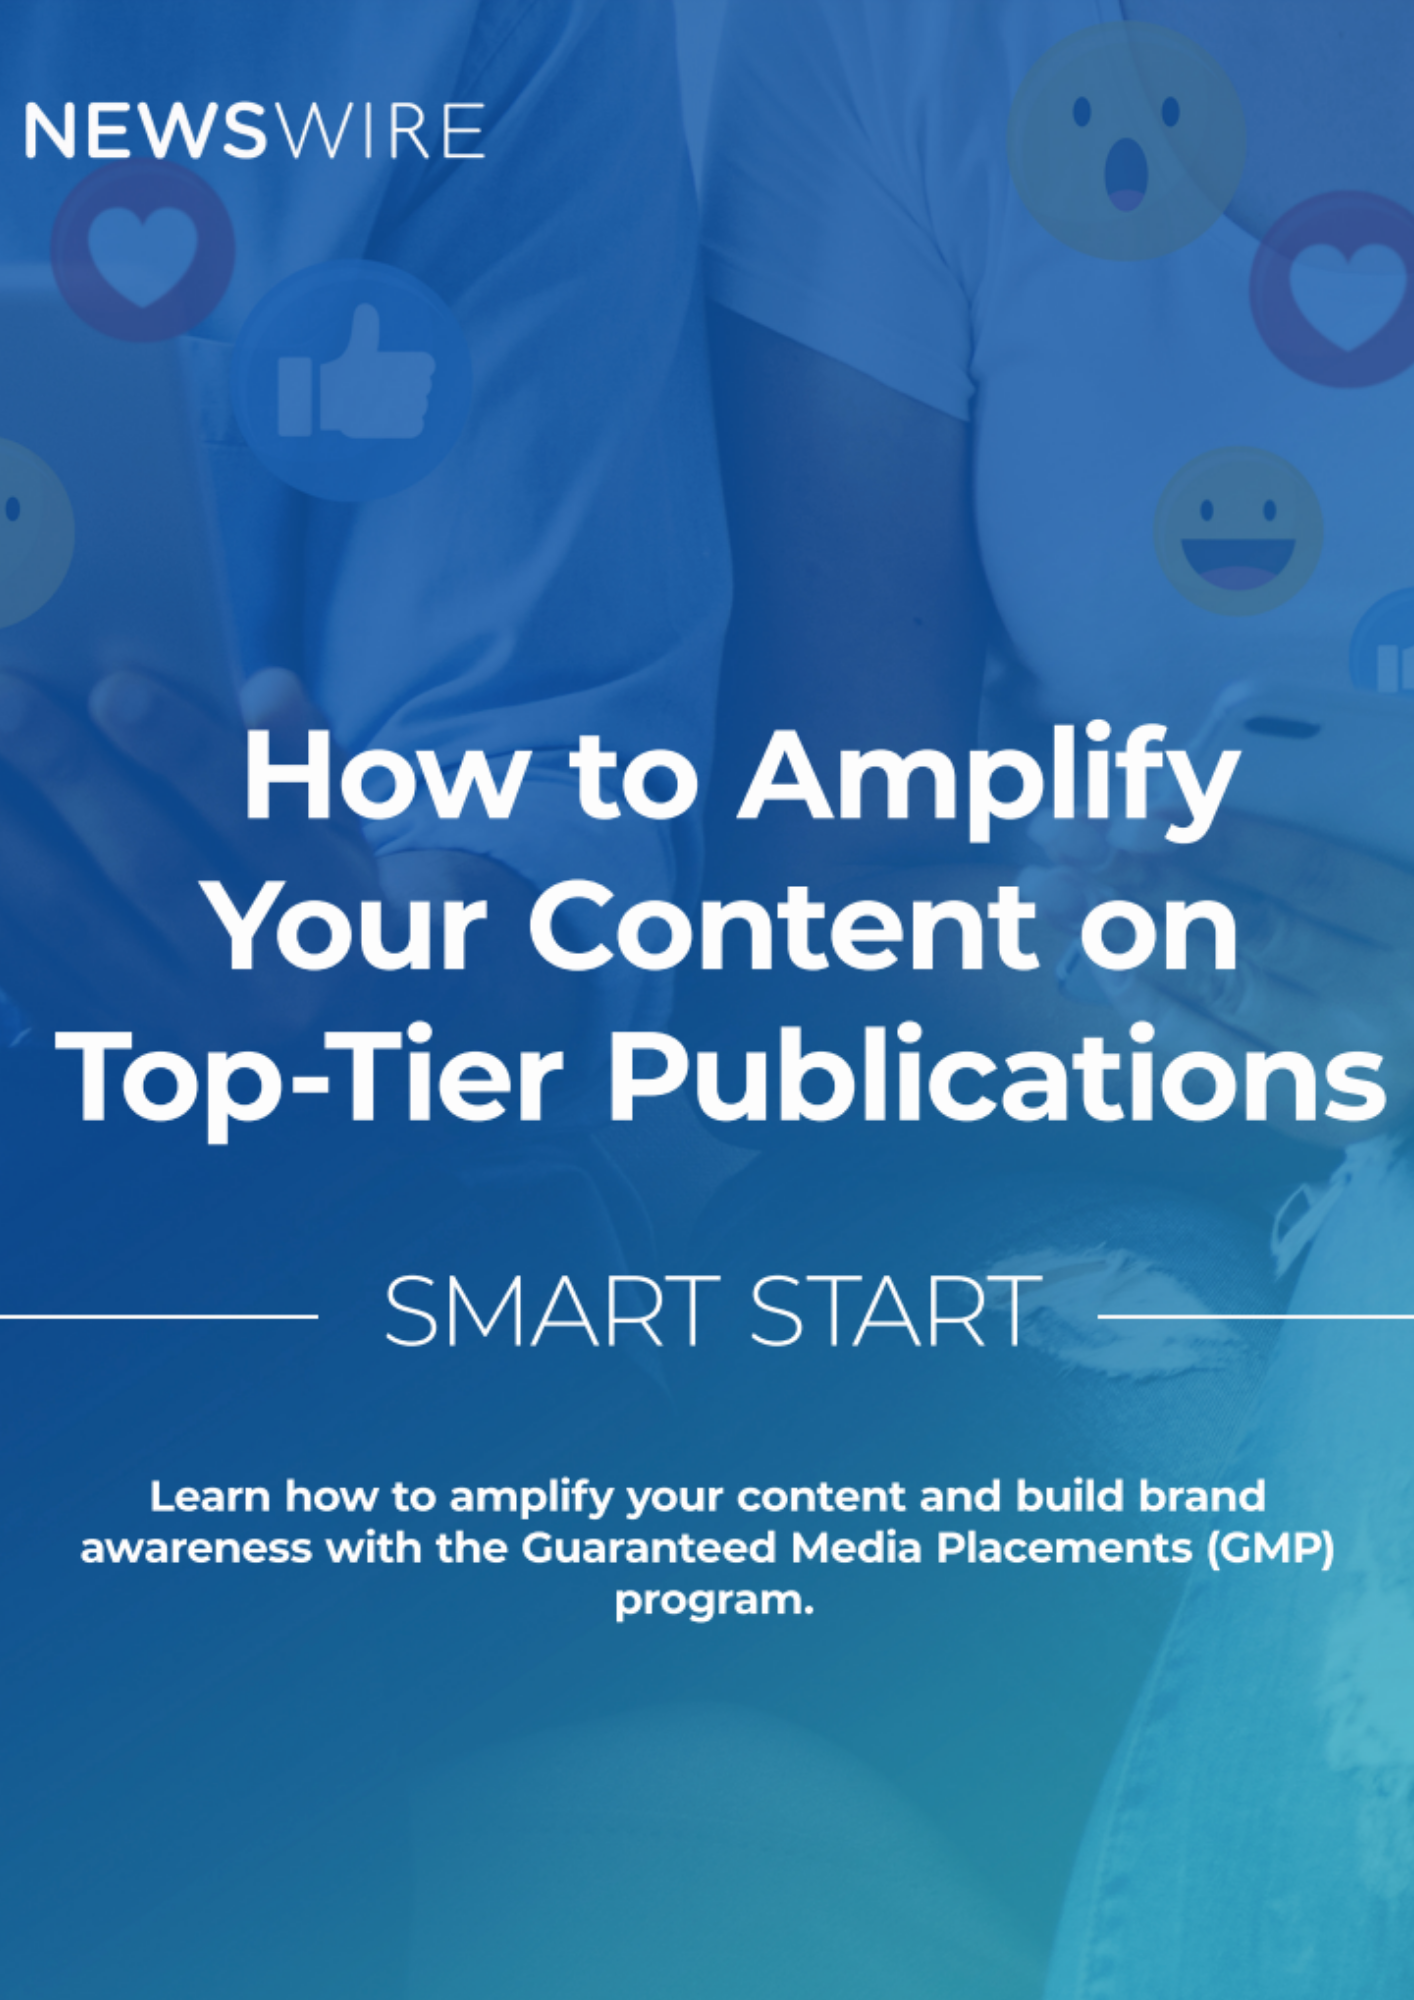 Smart Start: How to Amplify Your Content on Top-Tier Publications